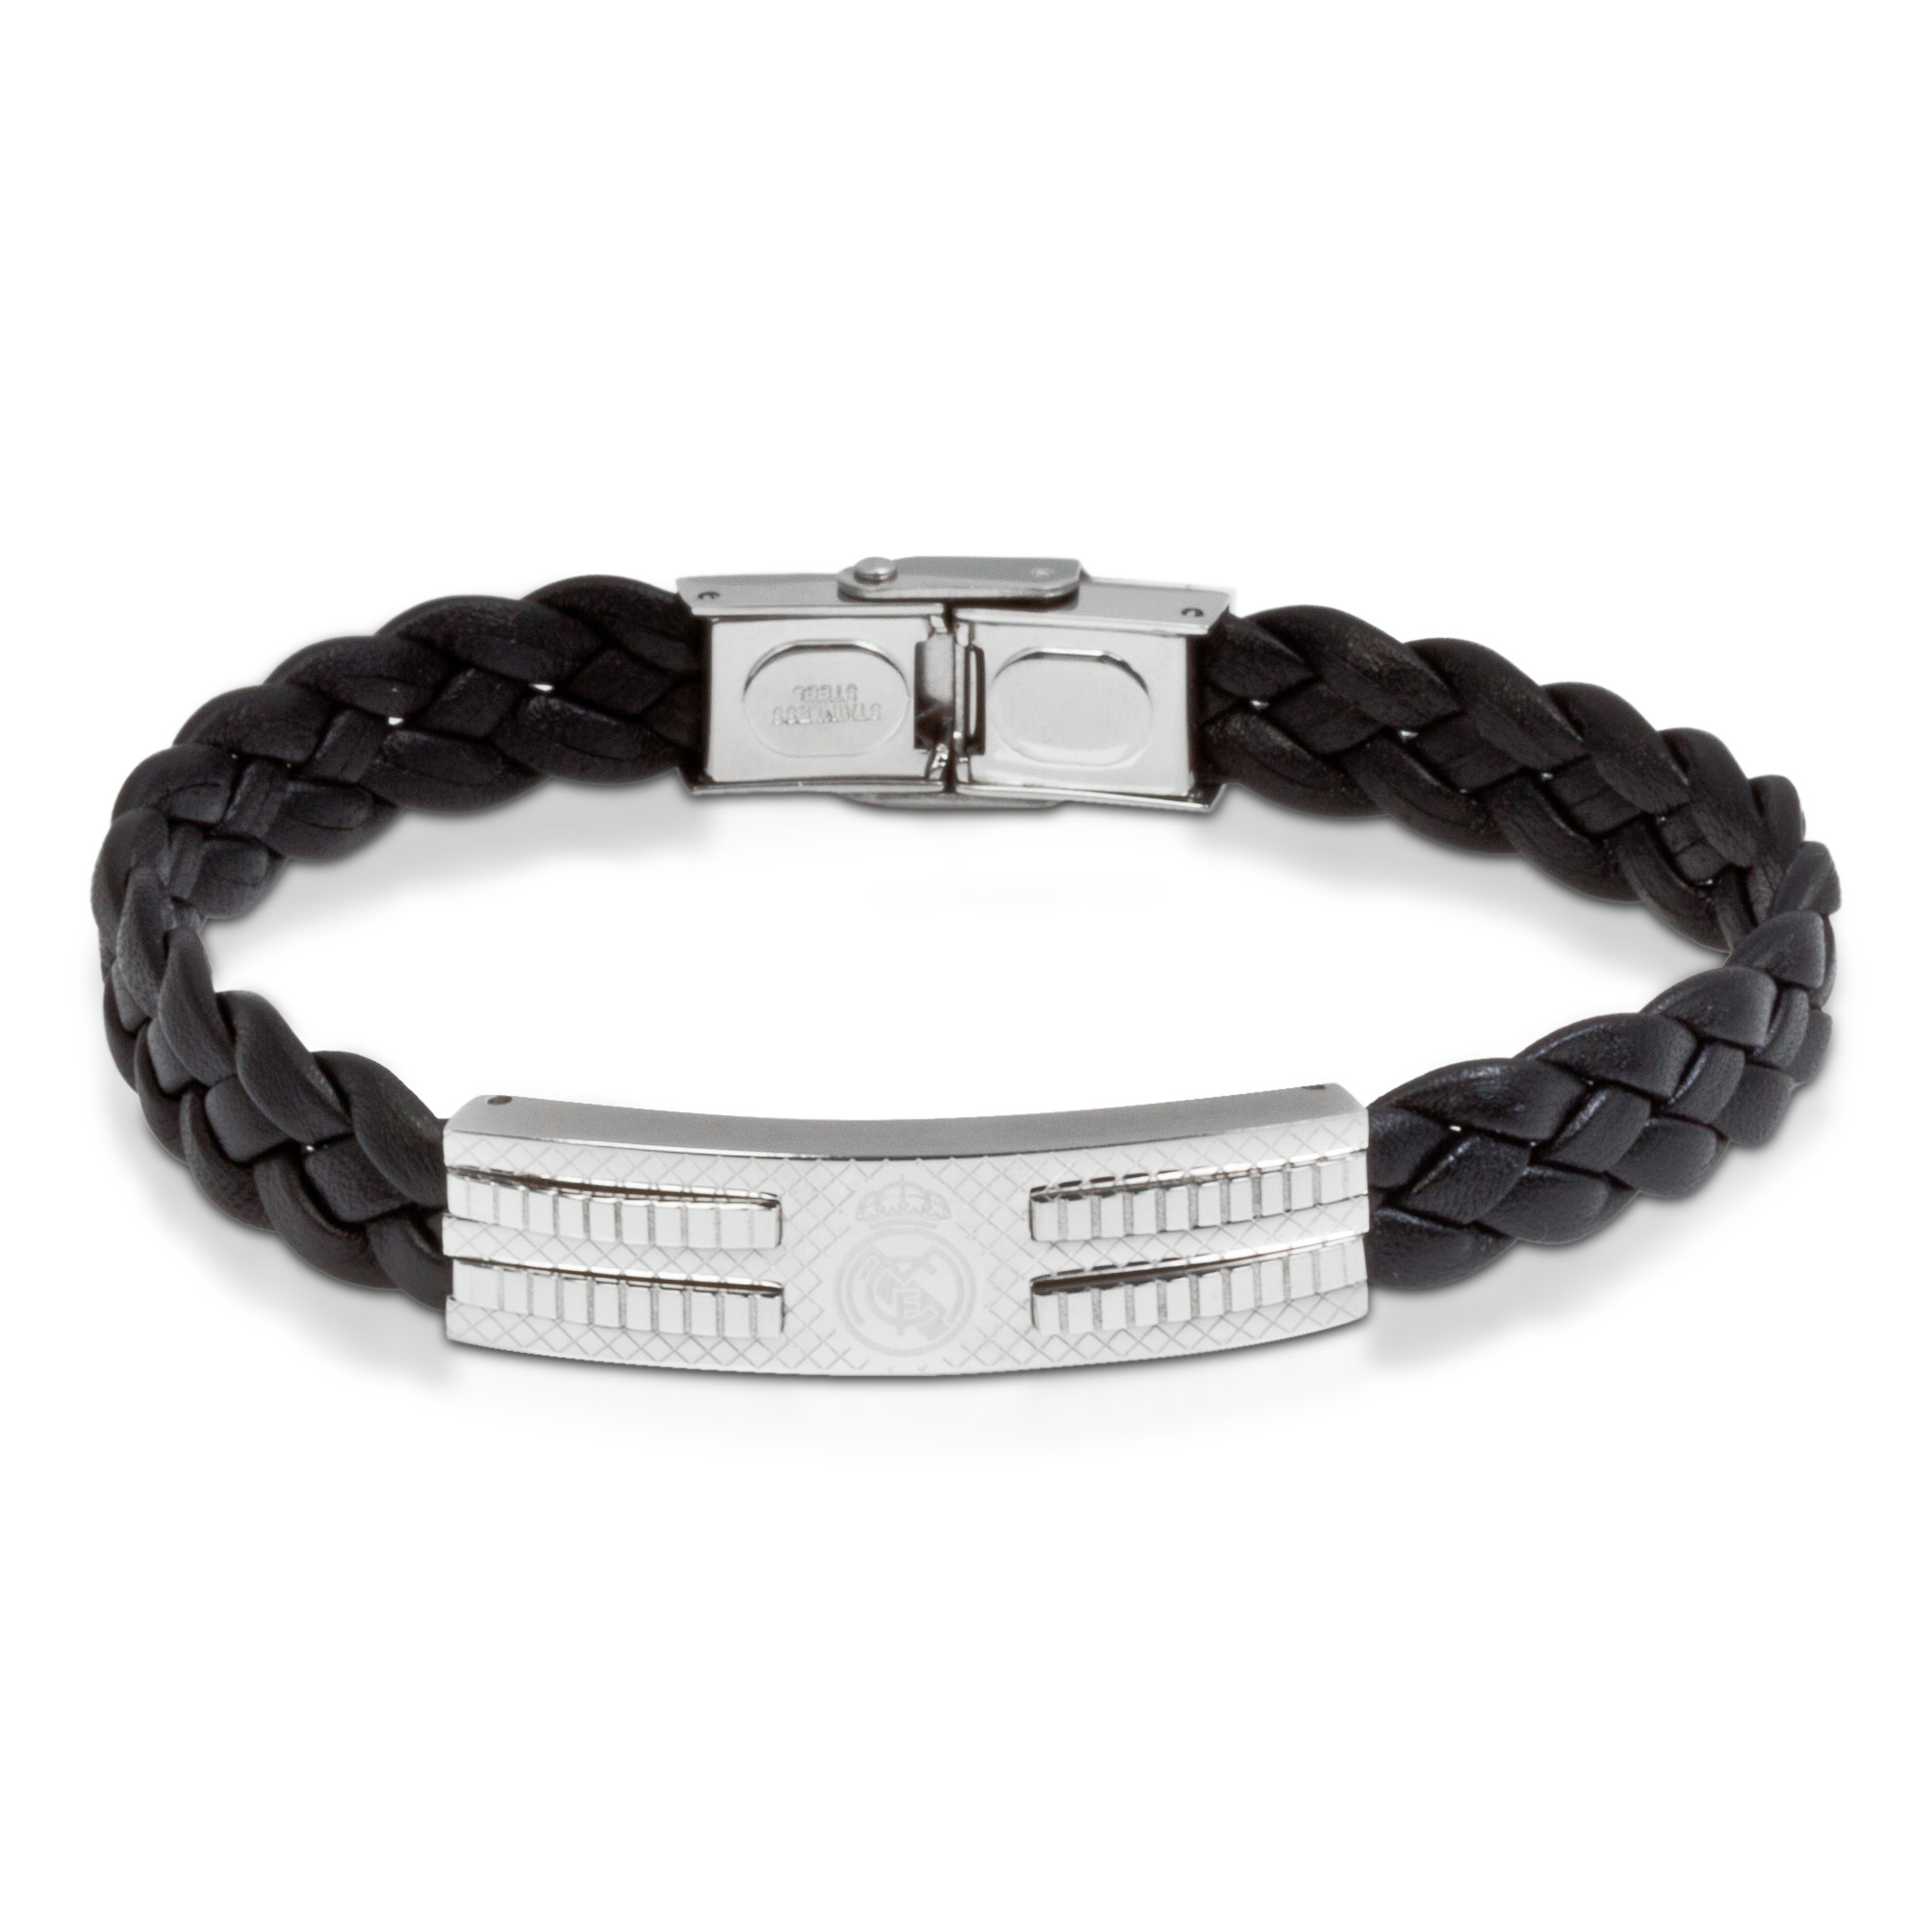 Real Madrid Fashion Bracelet - Stainless Steel